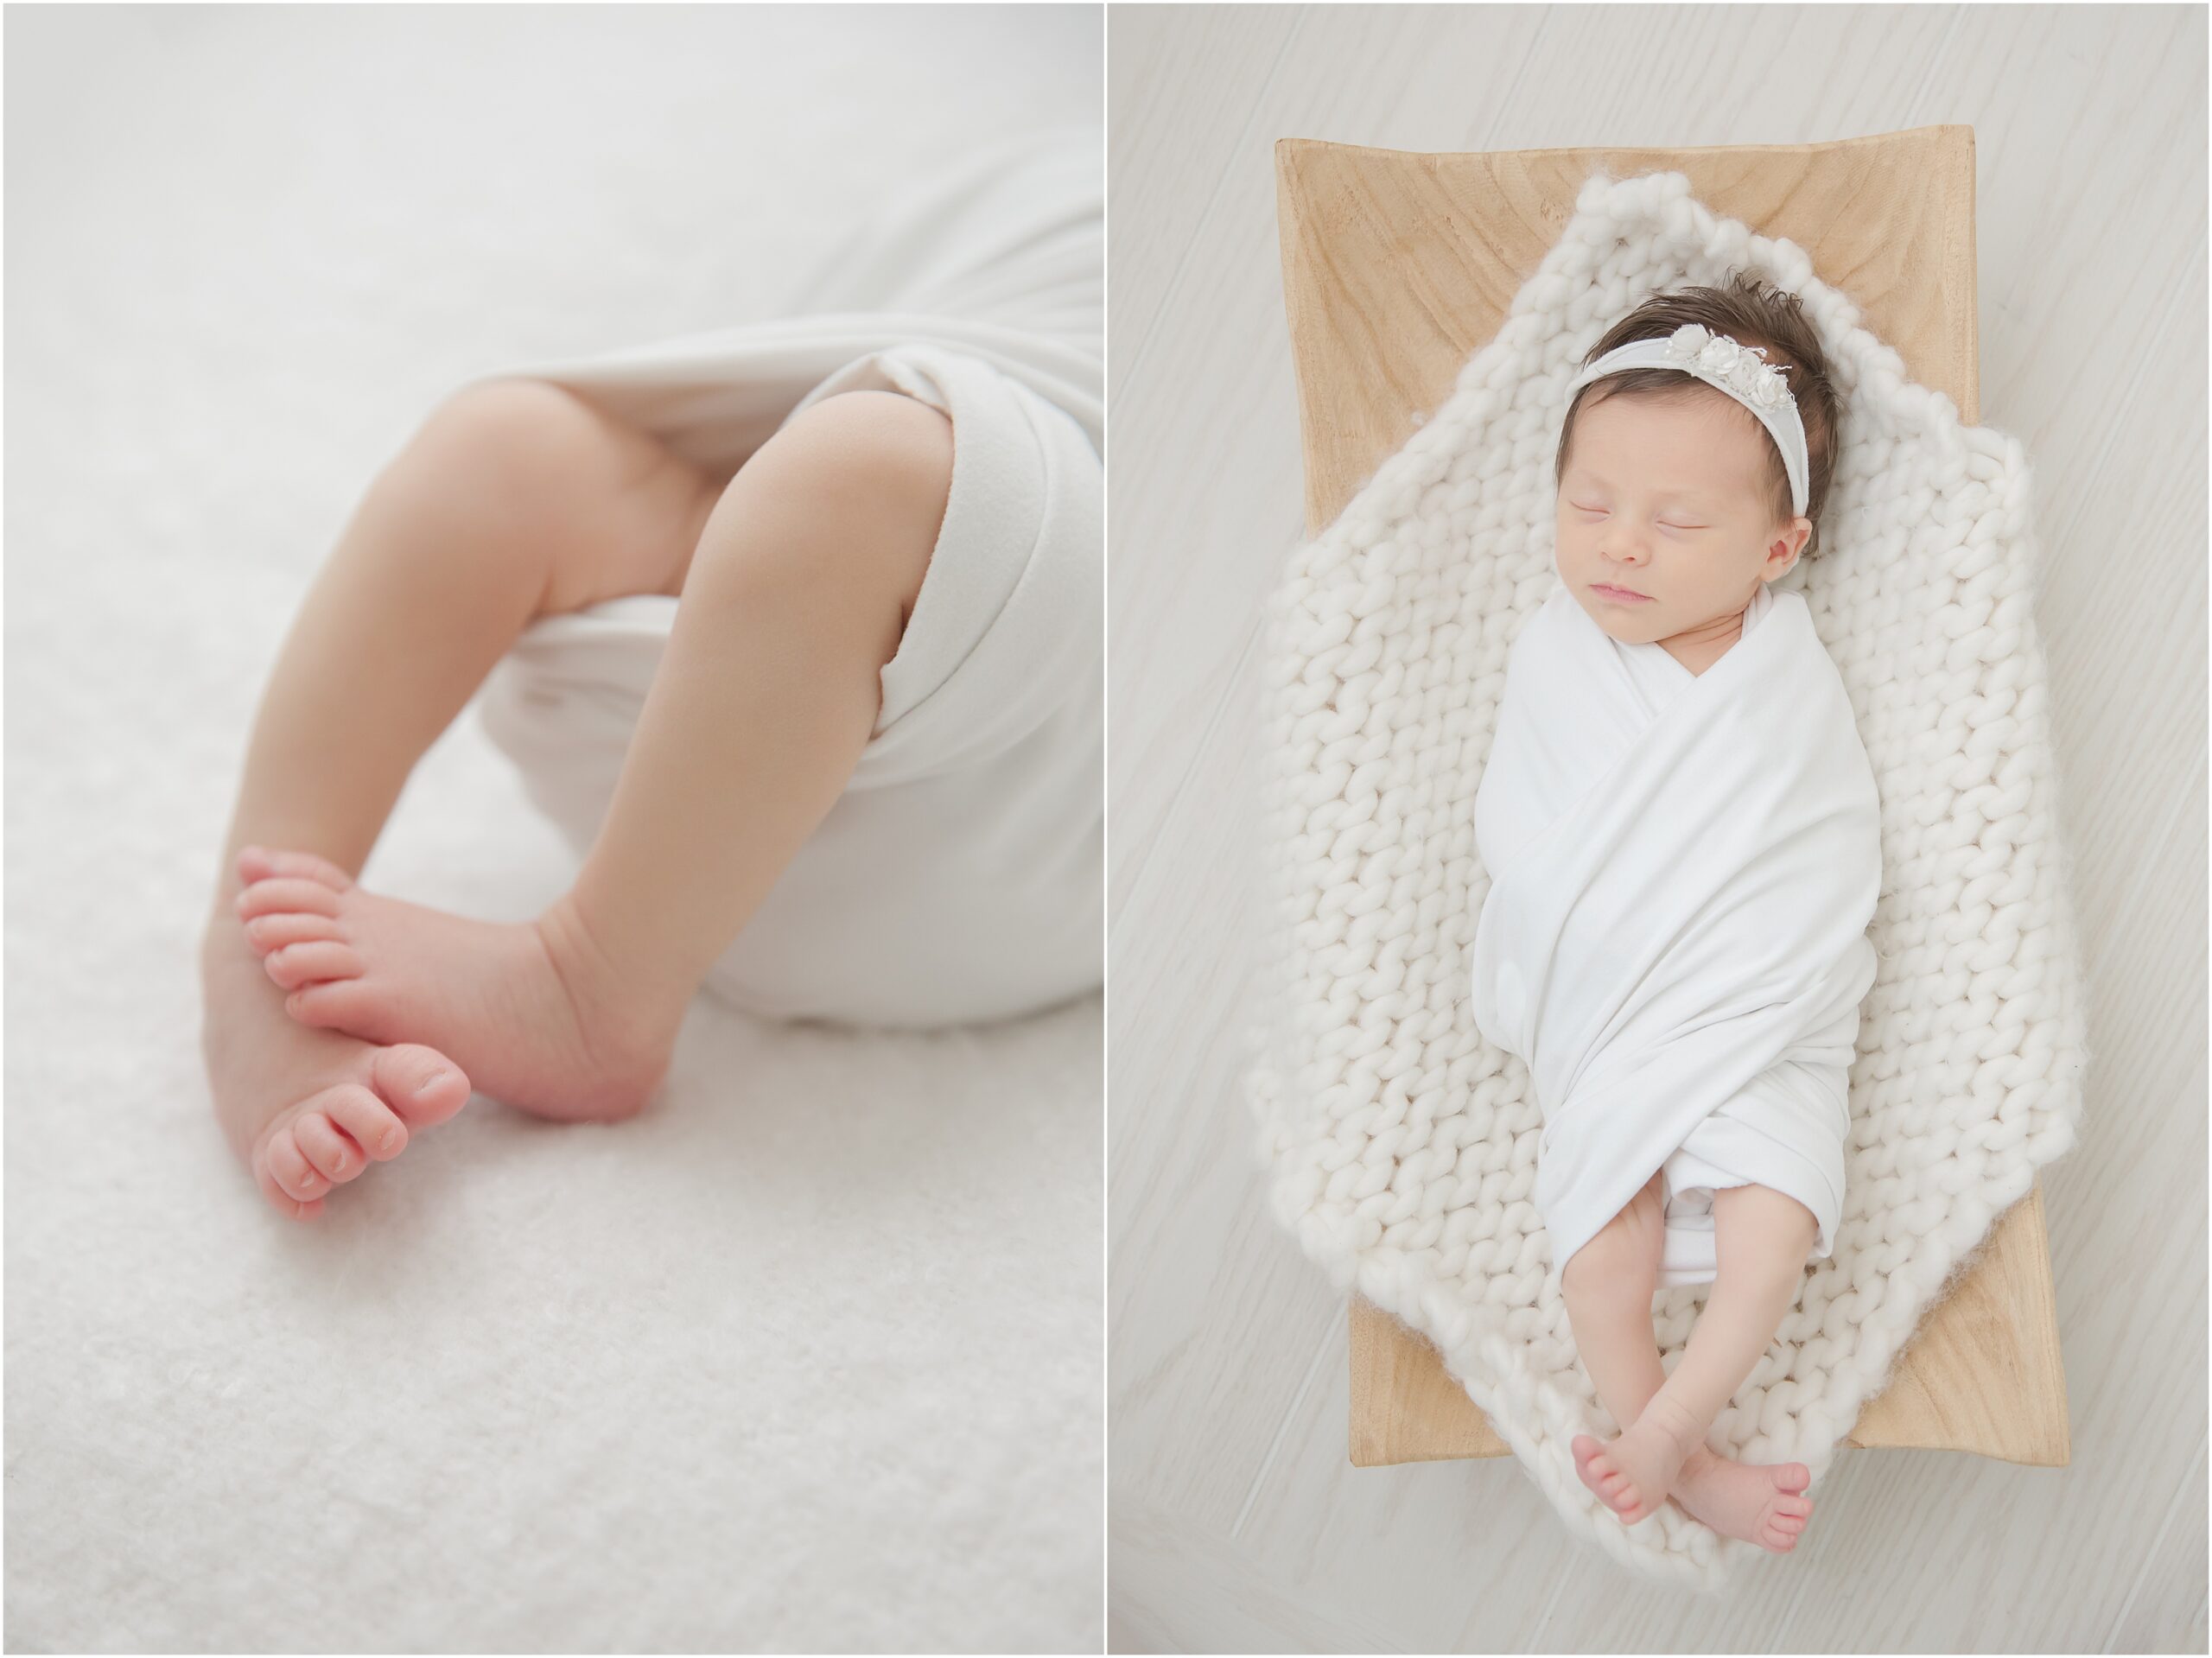 Collage of two photos of a newborn baby girl. The first photo is a backlit image of baby's feet. The second photo is of baby wrapped in a white swaddle, wearing a white headband, and laid in a light colored wood bowl.